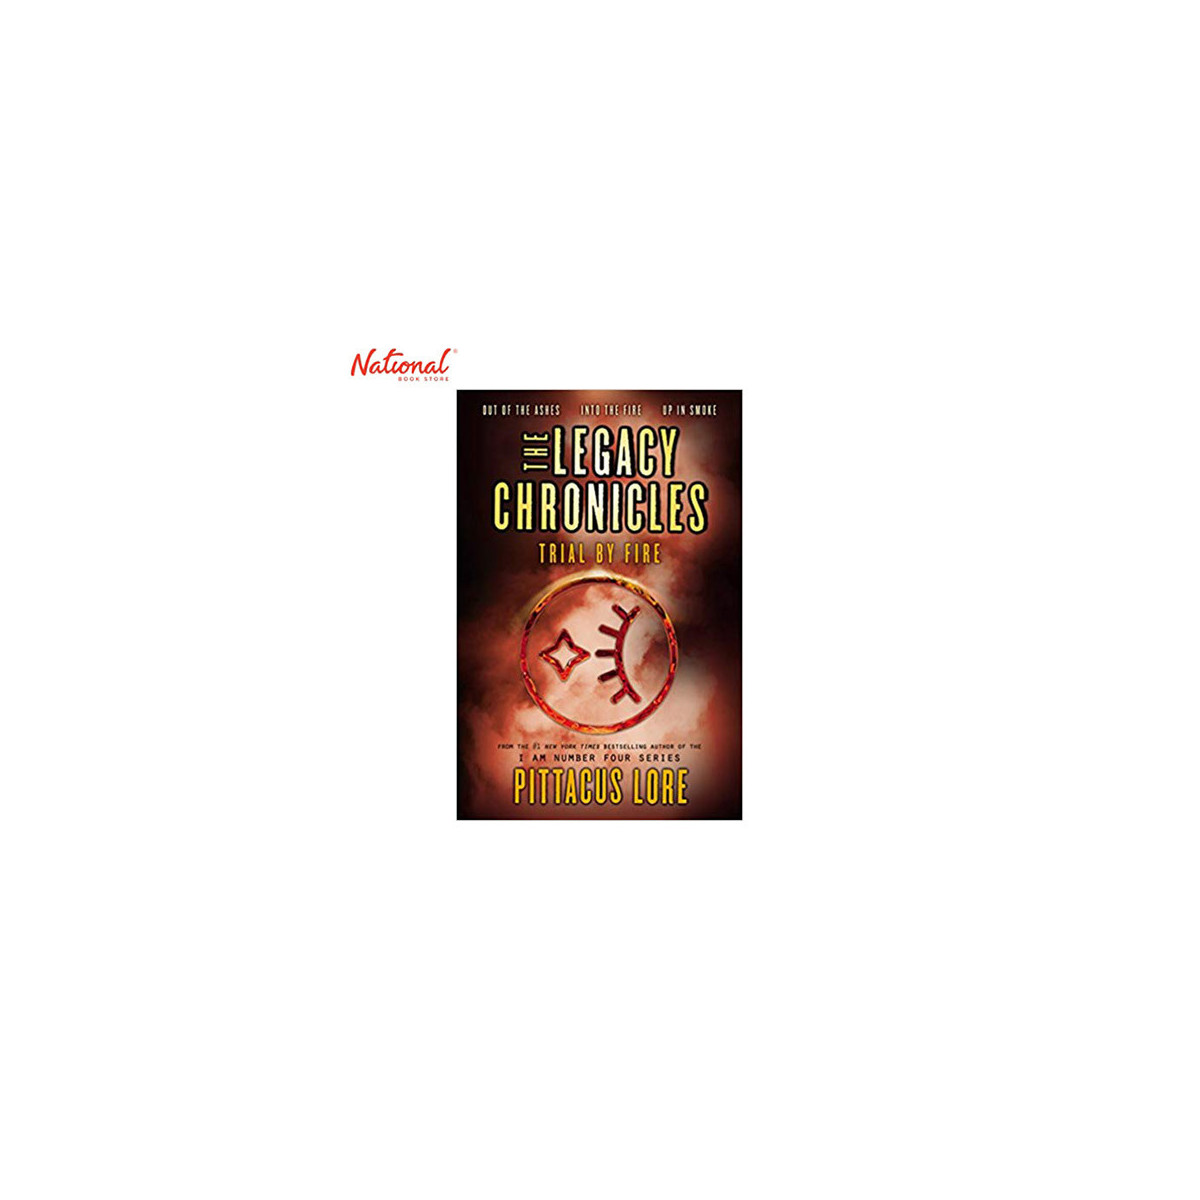 LL5 TRIAL BY FIRE - TRADE PAPERBACK